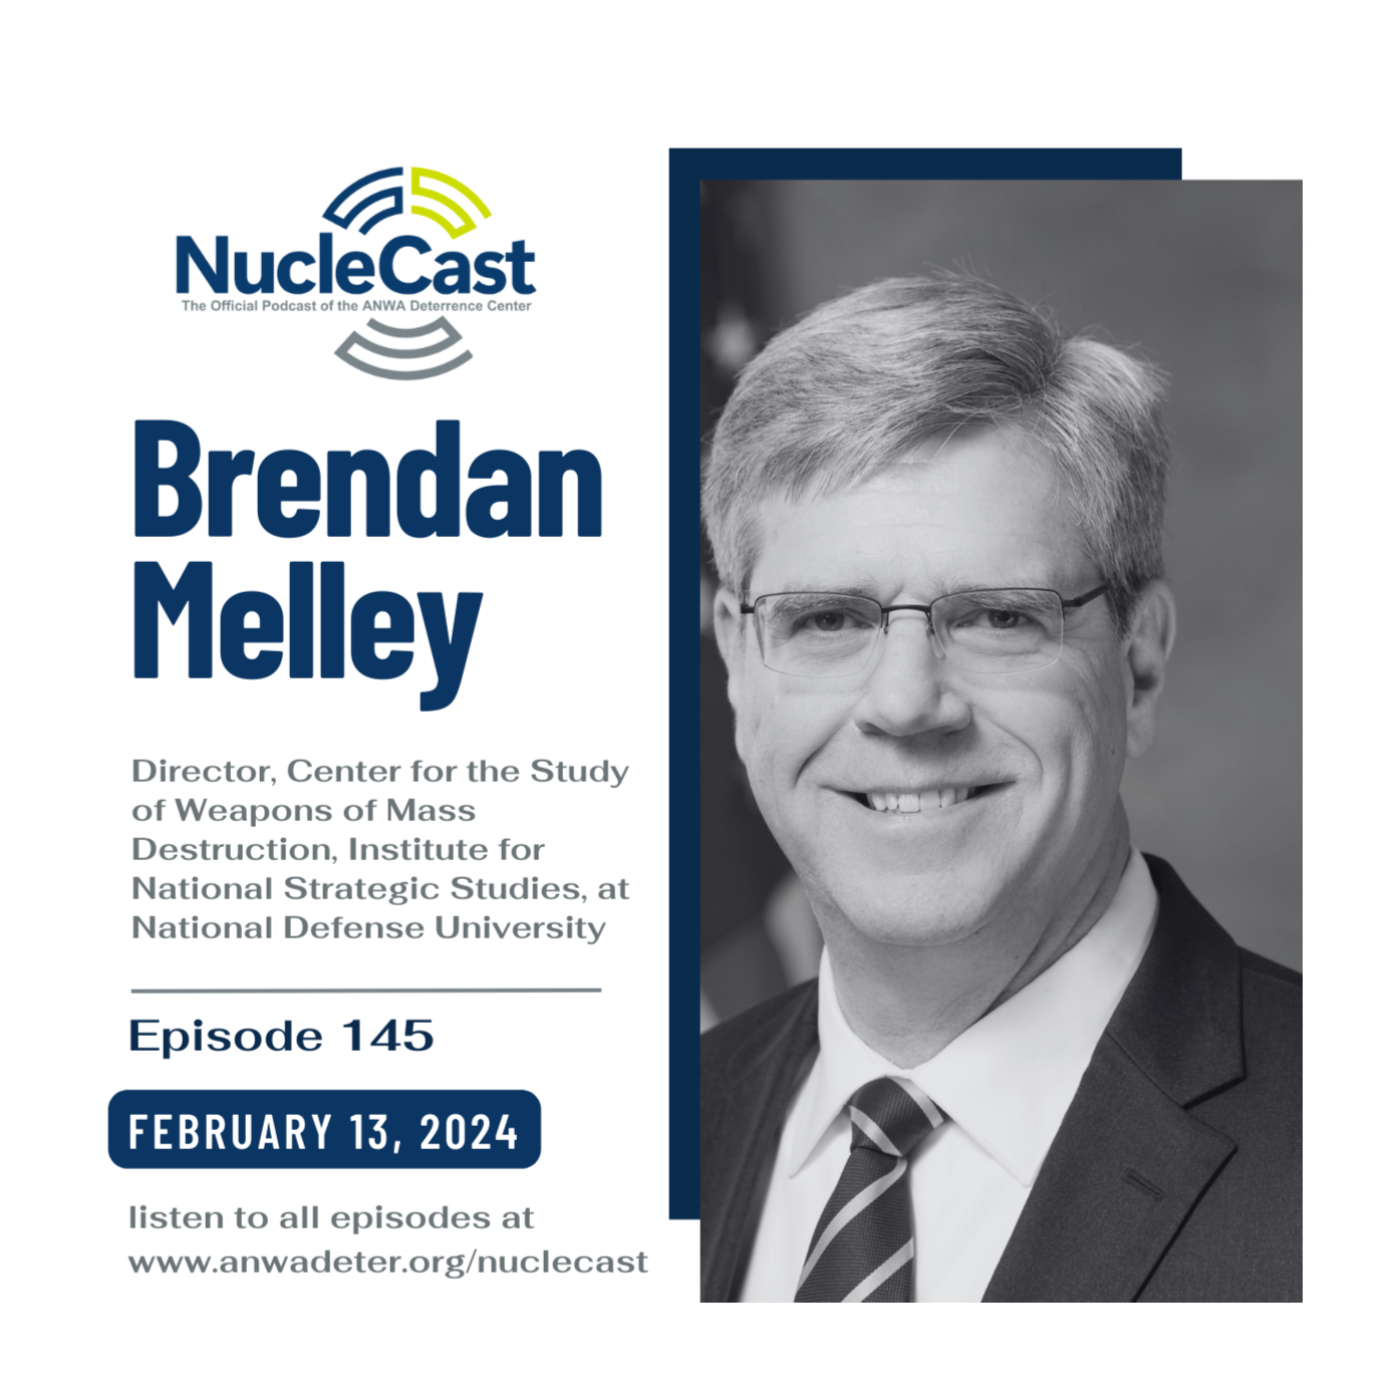 Brendan Melley - The Role of Center for the Study of Weapons of Mass Destruction